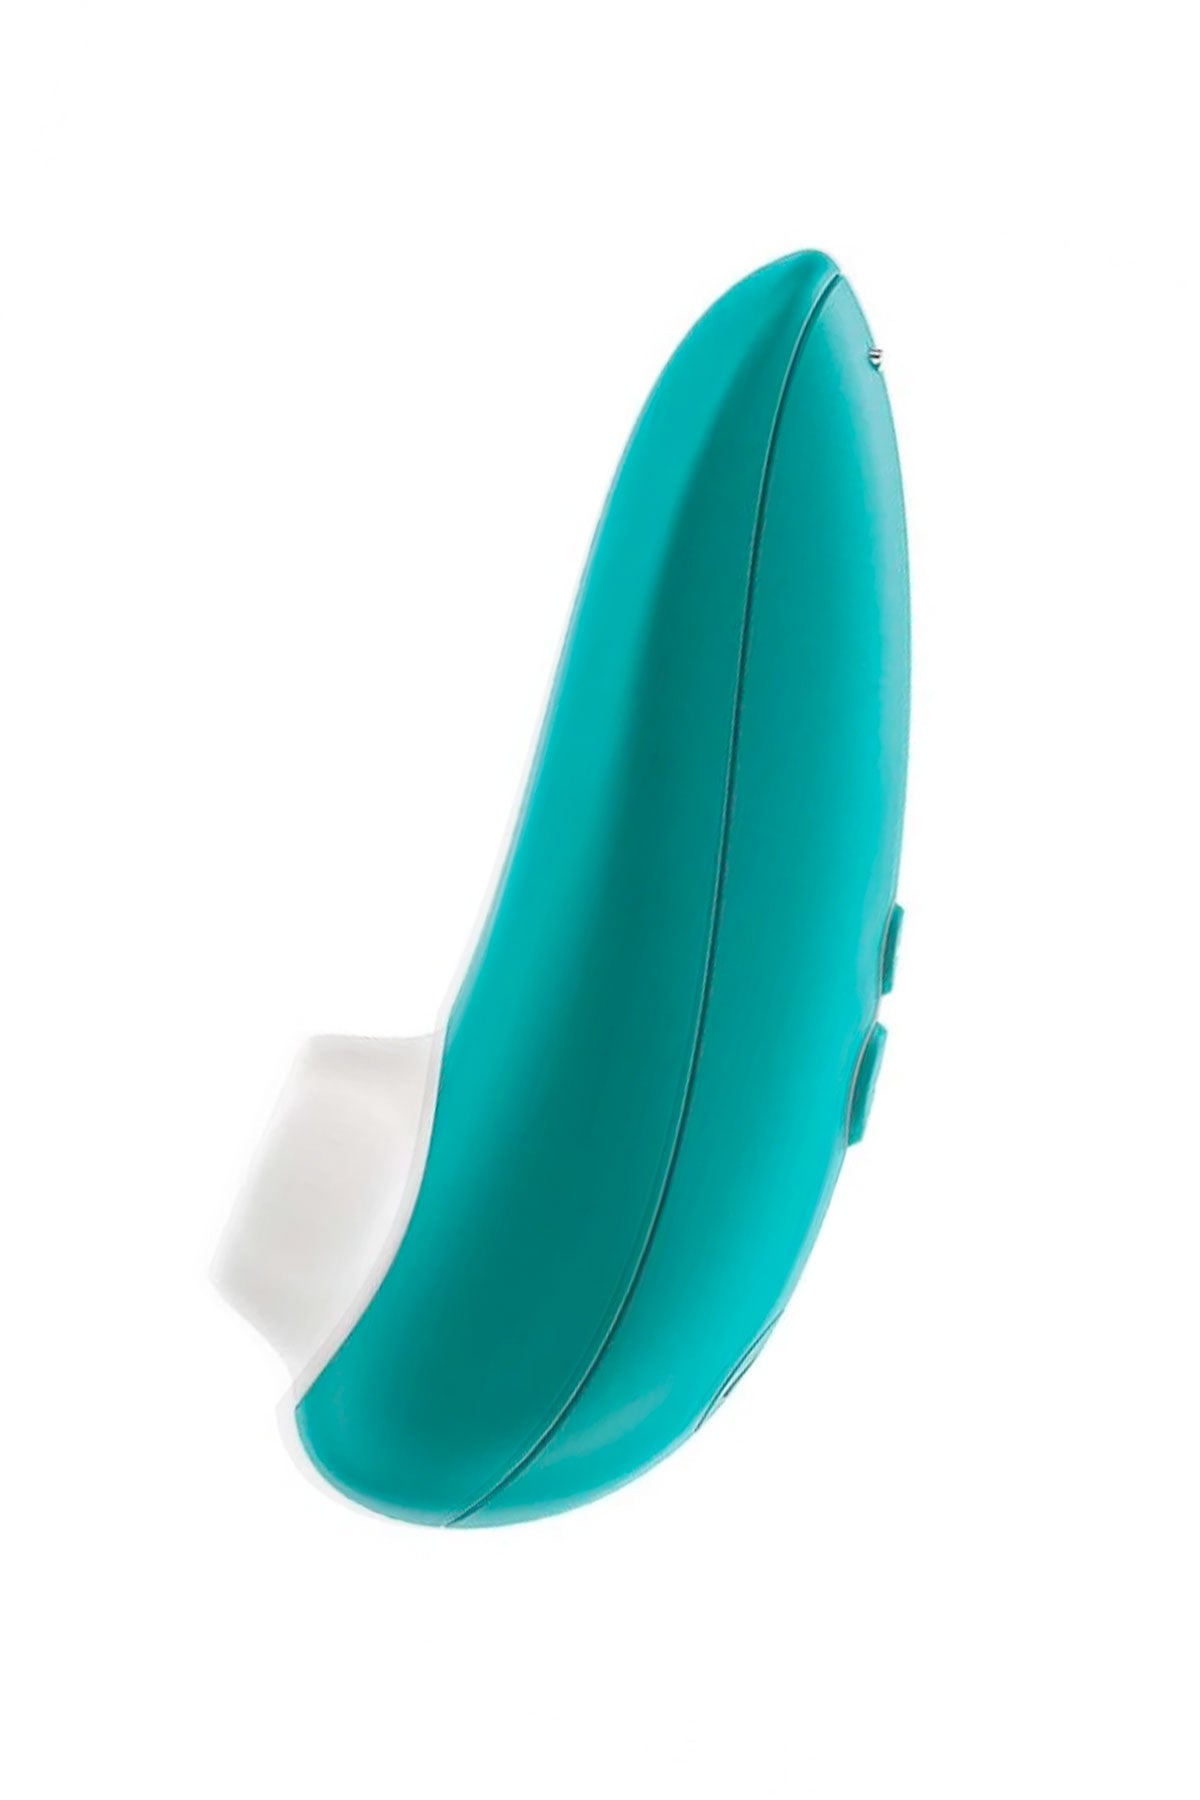 Turquoise Womanizer Starlet 3